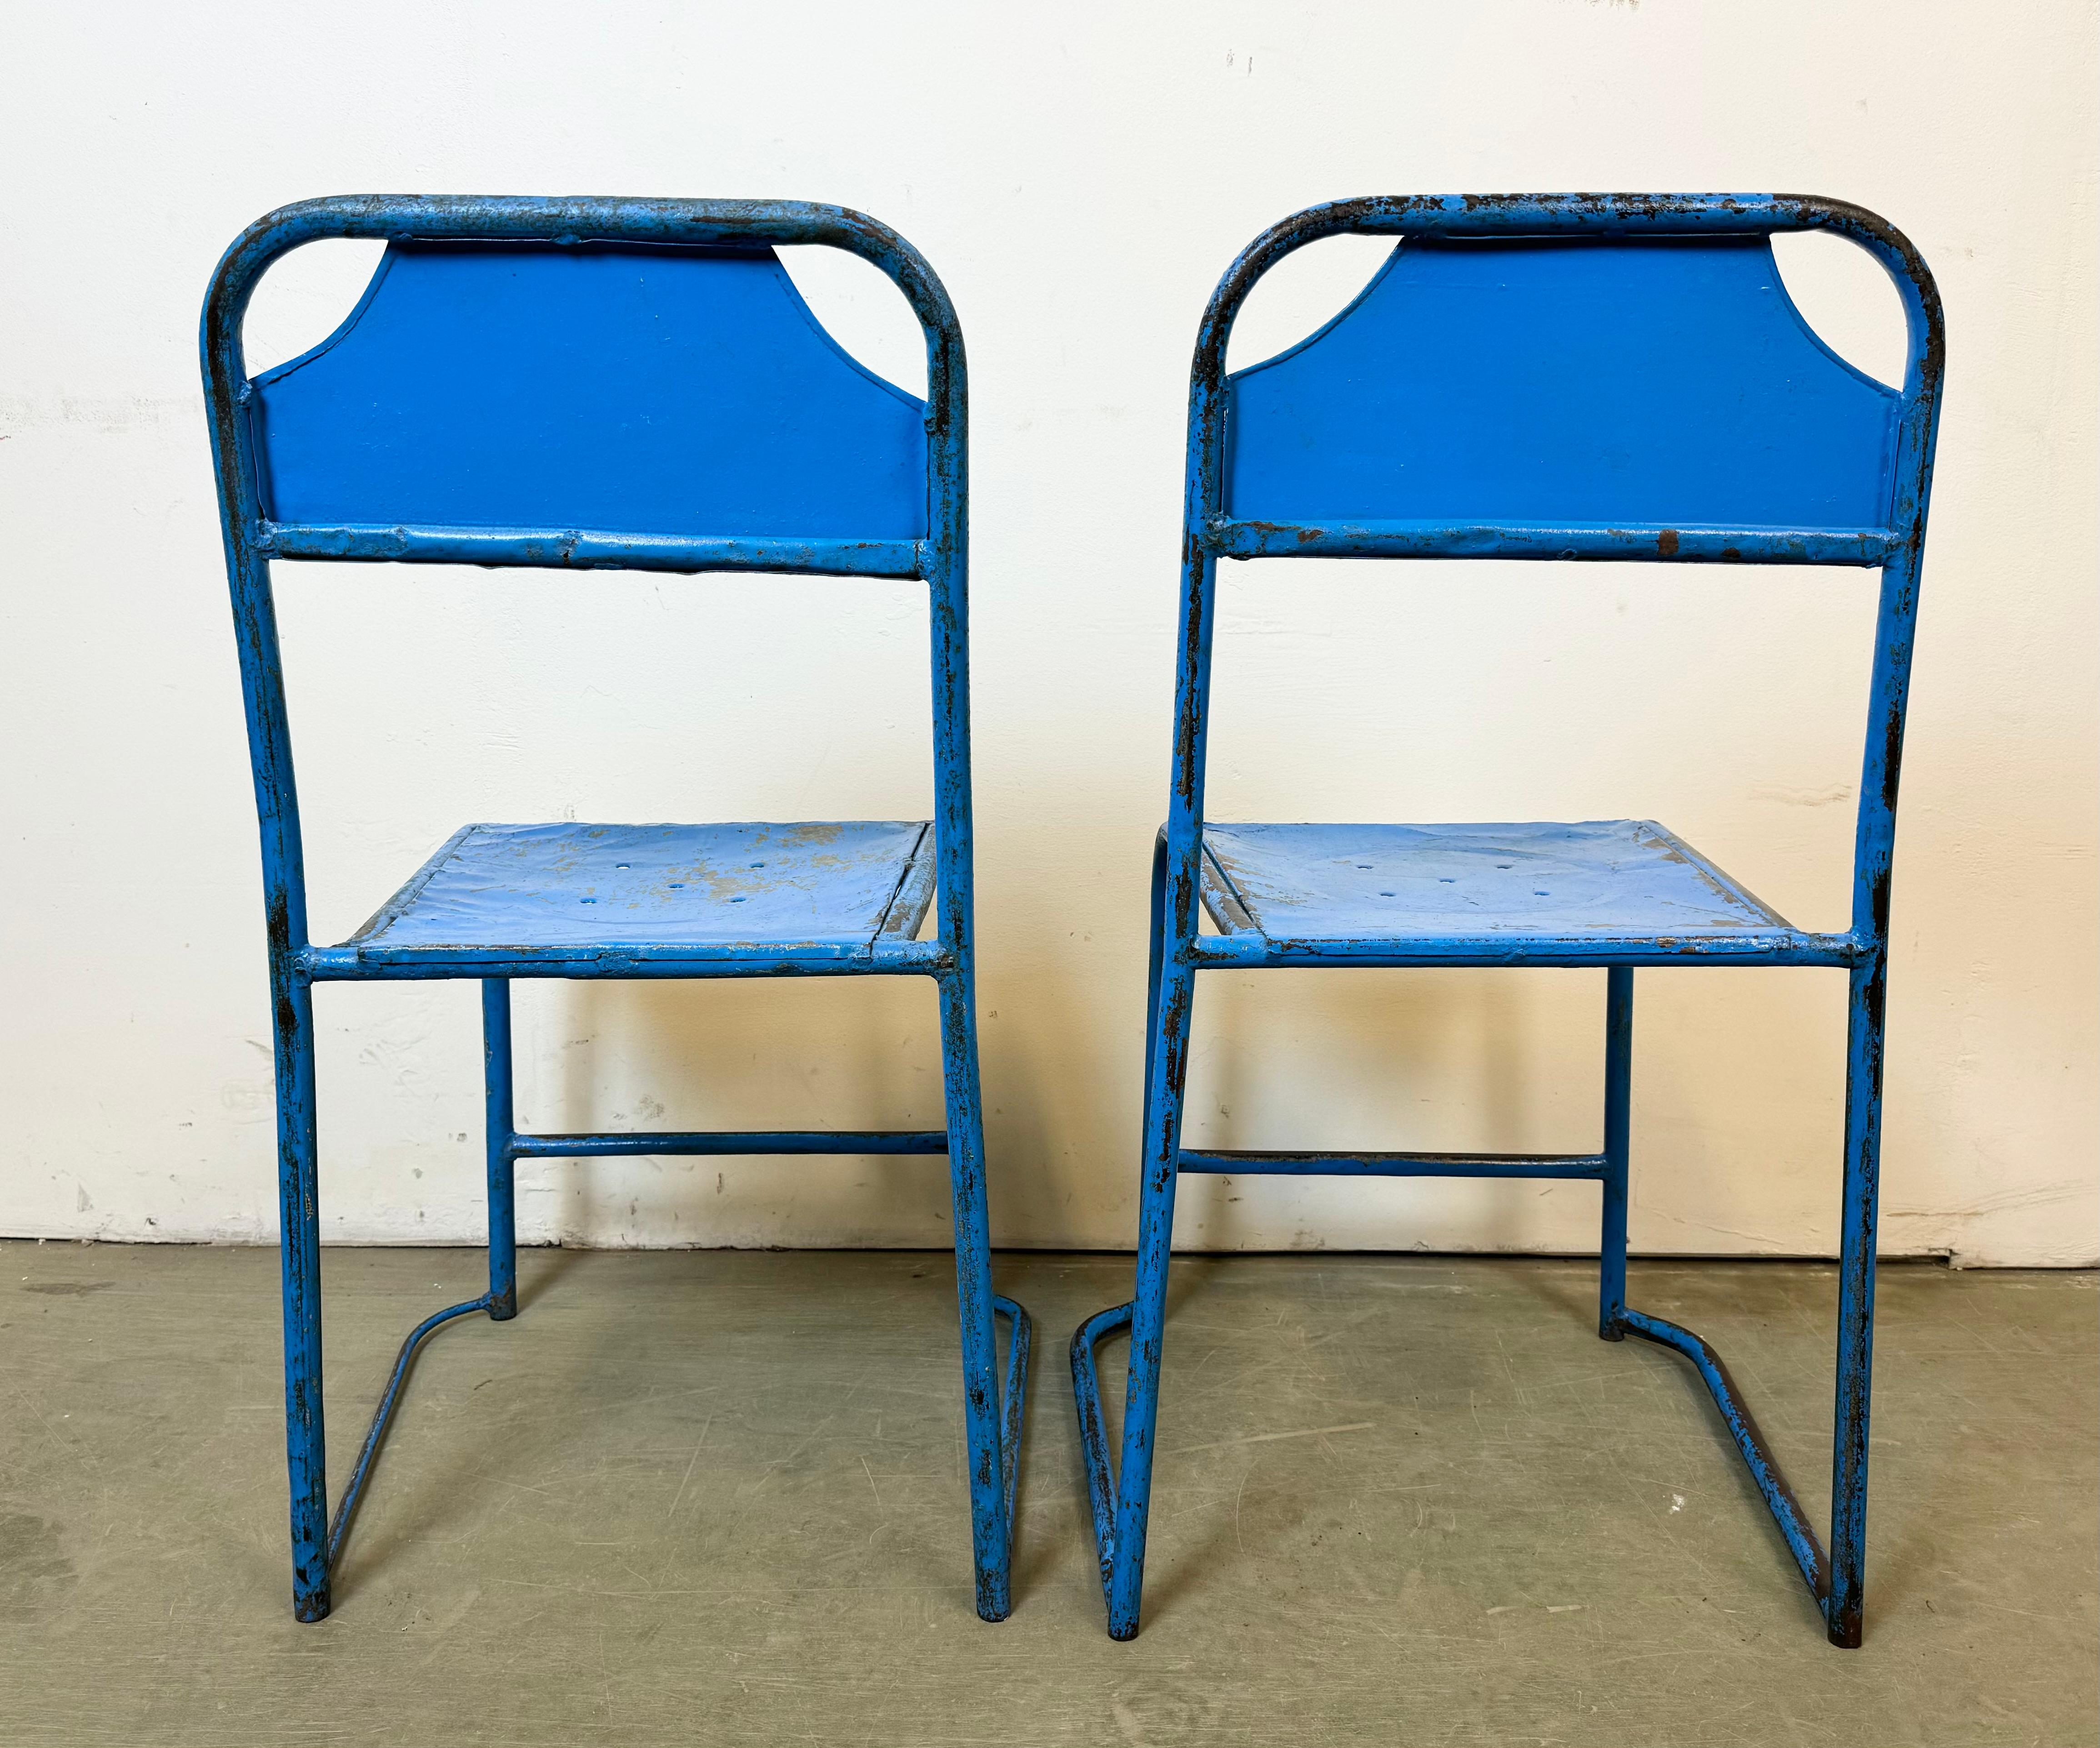 Blue Industrial Iron Chairs, Set of 2, 1950s For Sale 1